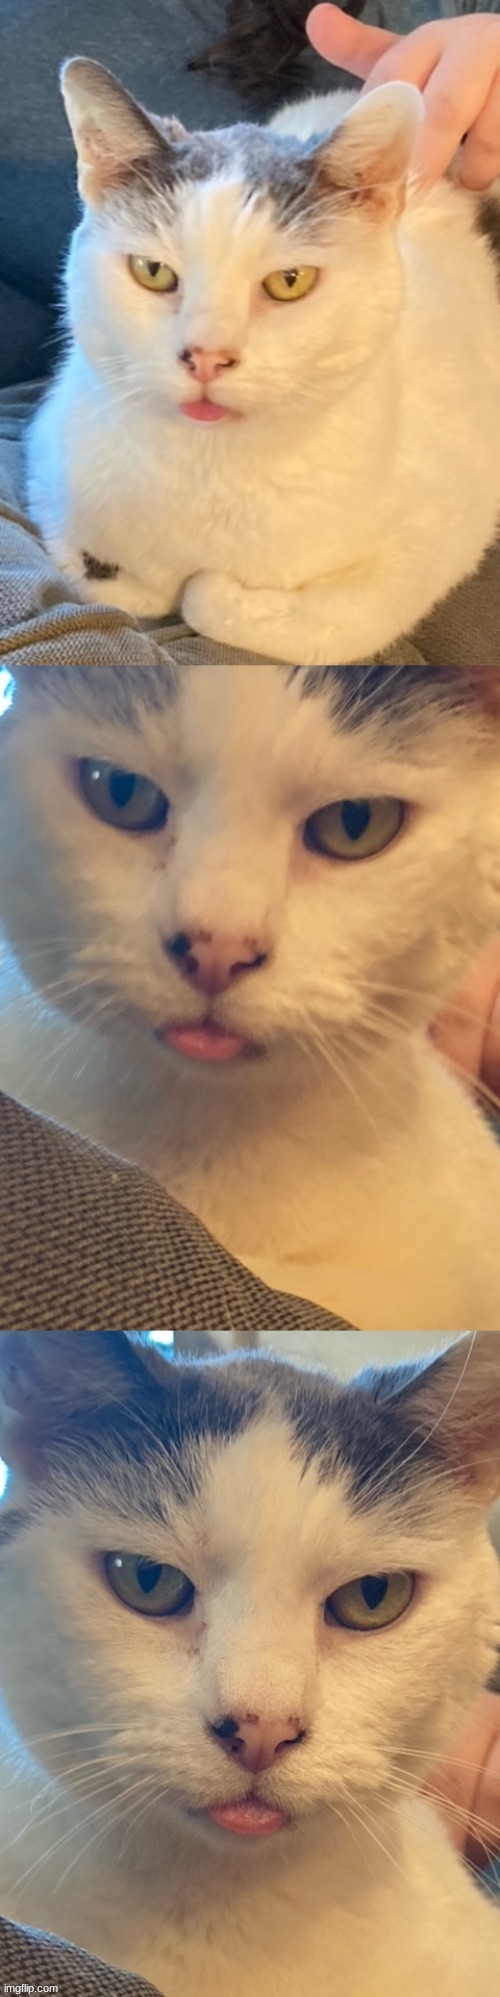 cat blepping | image tagged in cats,cute,cat | made w/ Imgflip meme maker